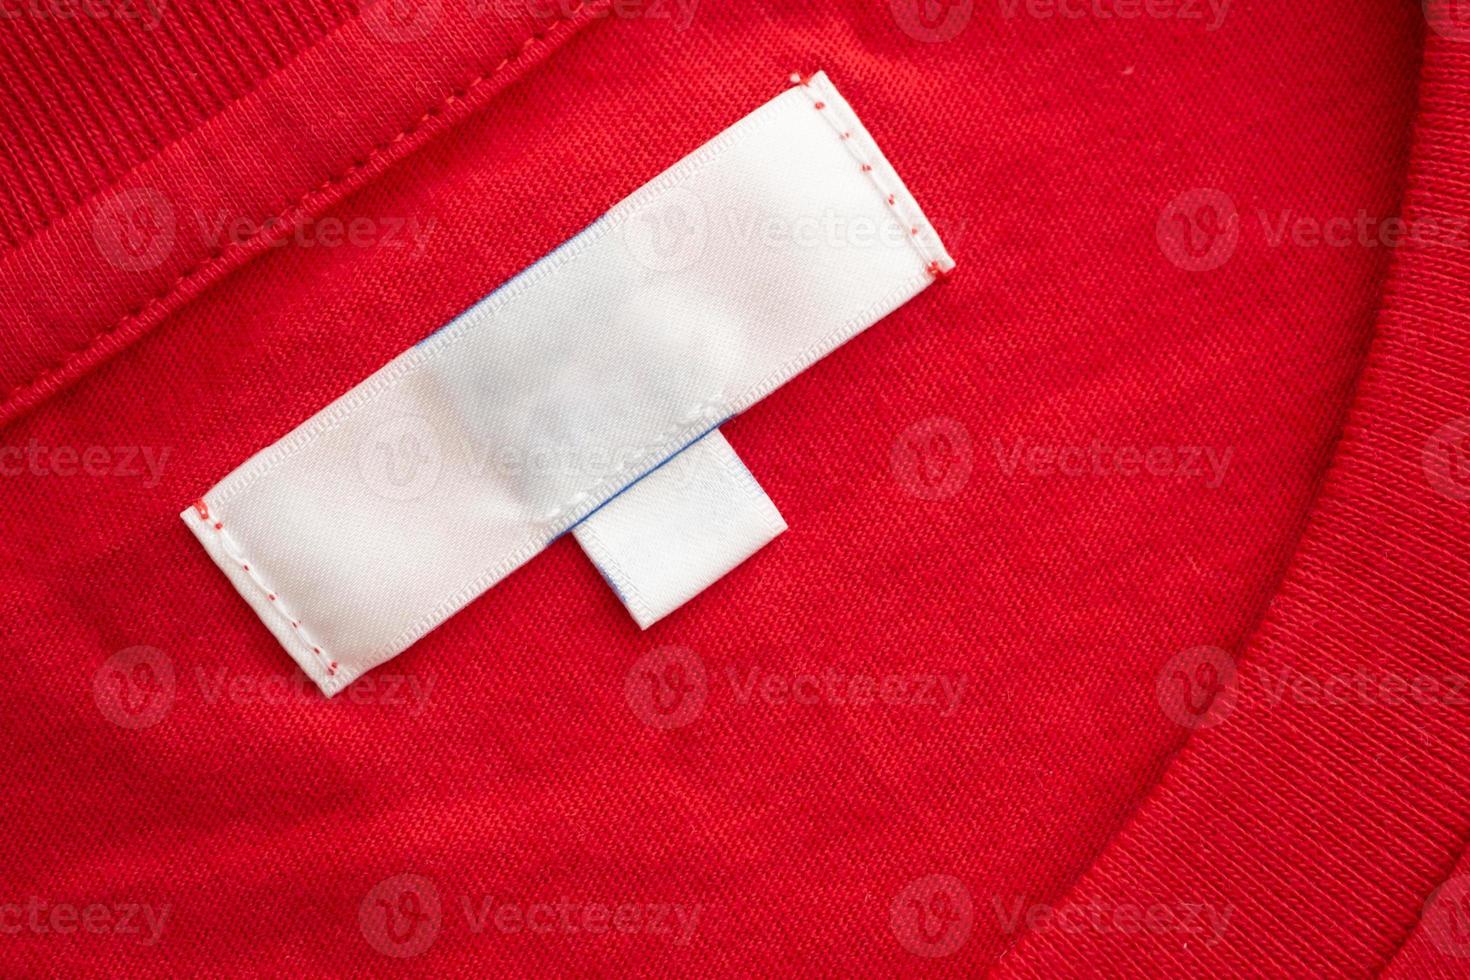 White blank clothing tag label on new red cotton shirt fabric texture background photo